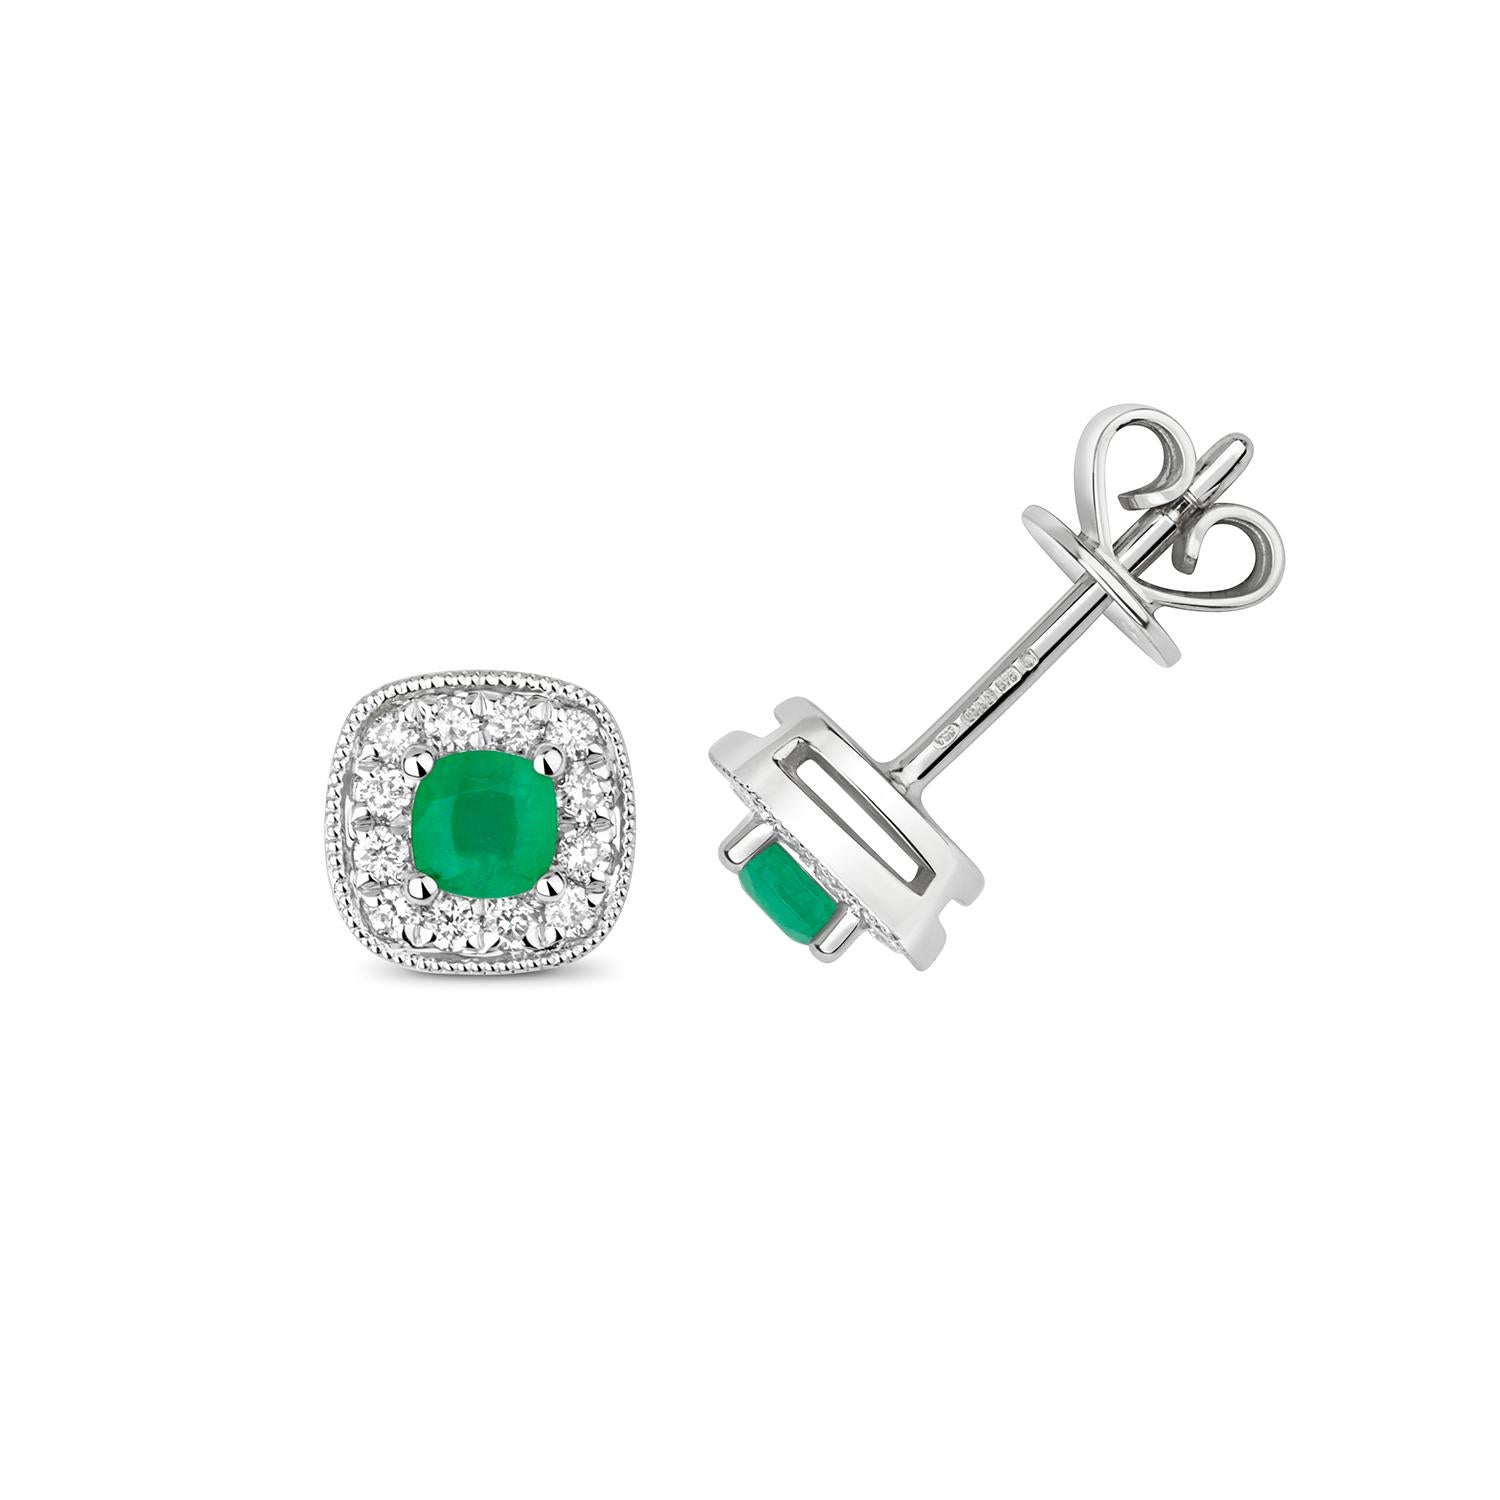 DIAMOND AND EMERALD CUSHION STUDS

9CT W/G 24RD/0.15 2EMD/0.25

Weight: 1.4g

Number Of Stones:2+24

Total Carates:0.250+0.150